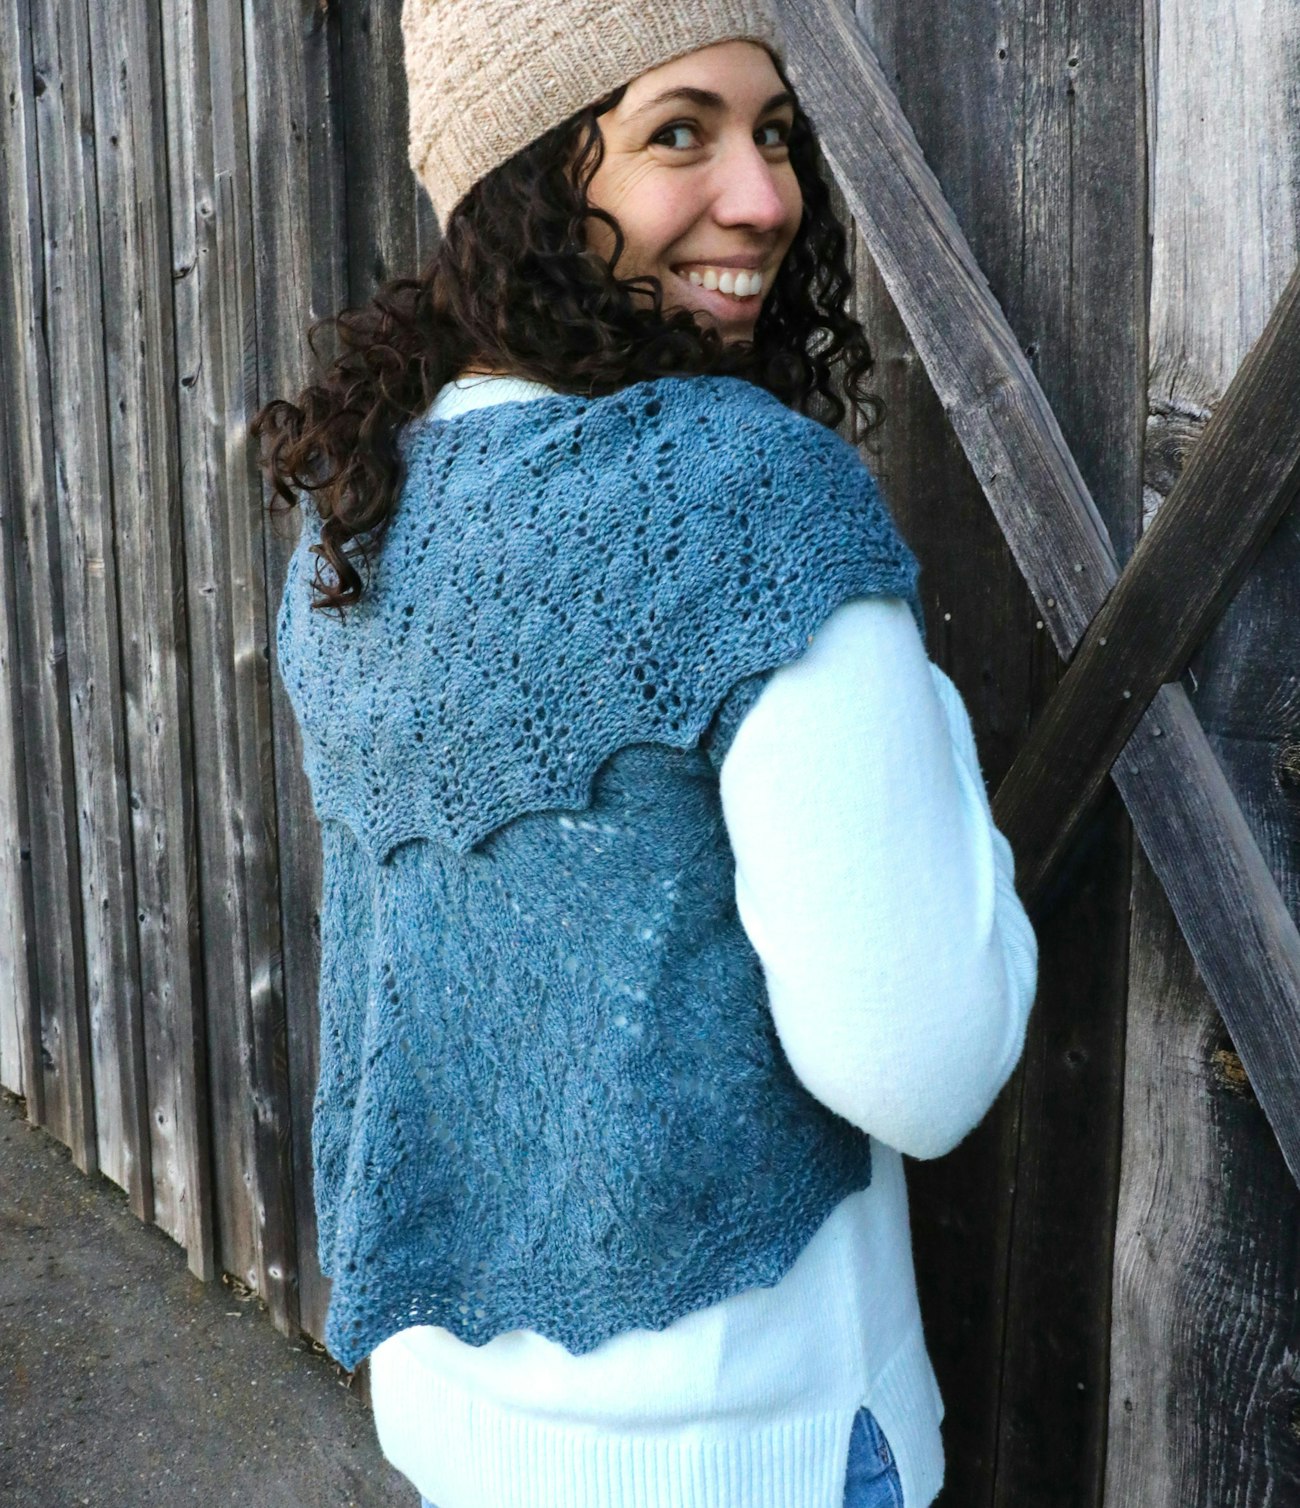 Woman with curly dark hair wearing blue-green knitted wrap